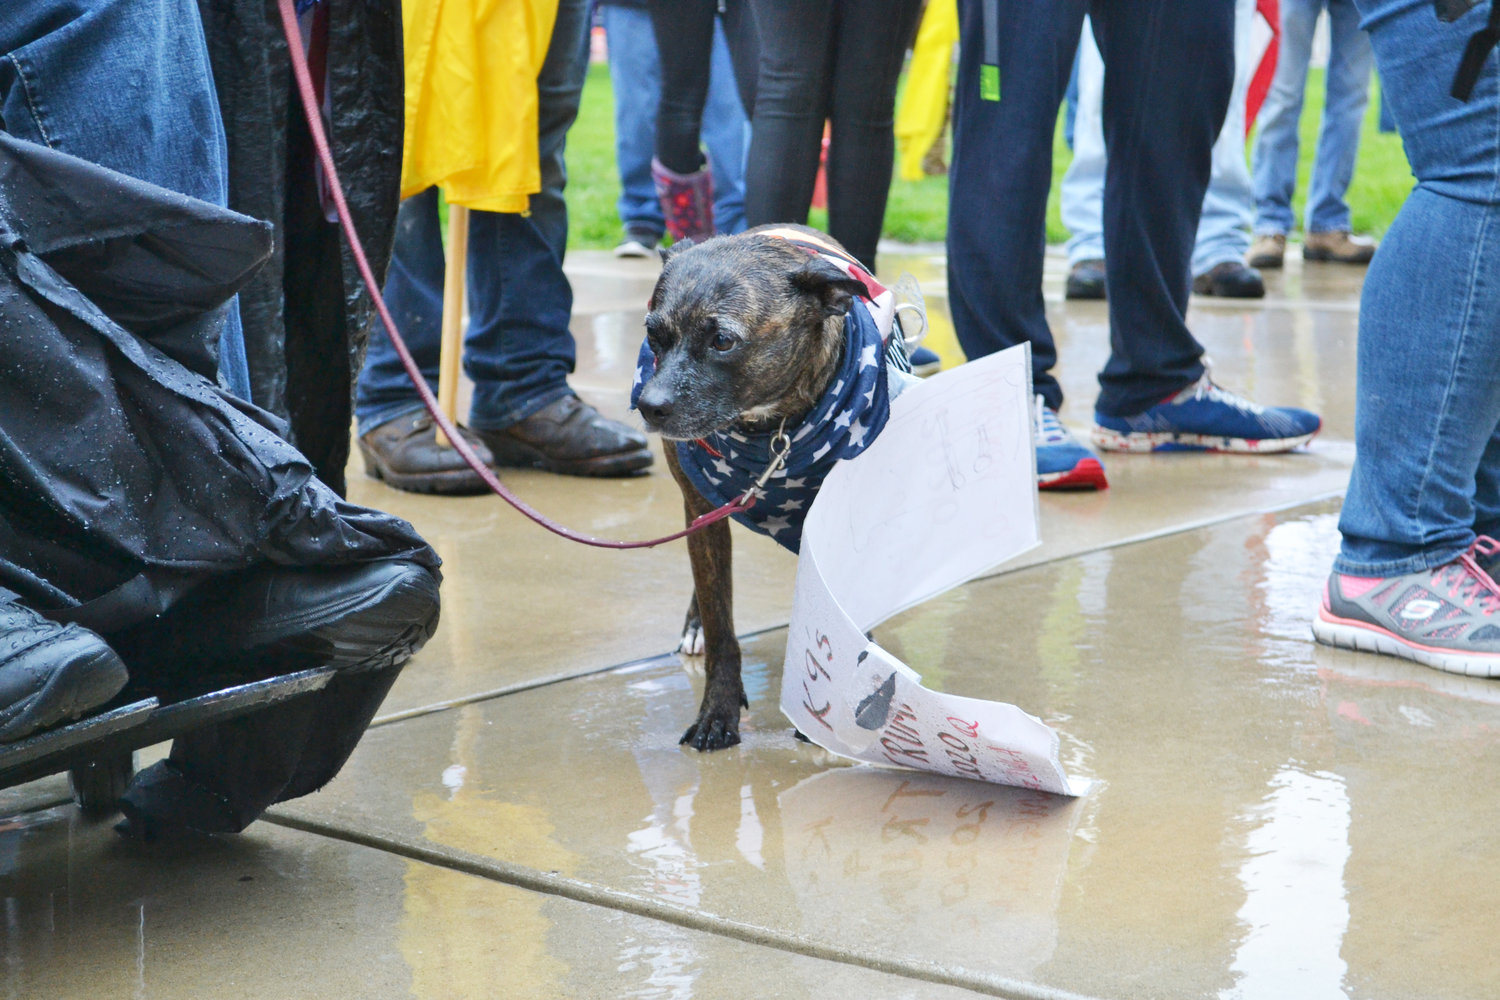 A protester's dog stands in the downpour at the Capitol.